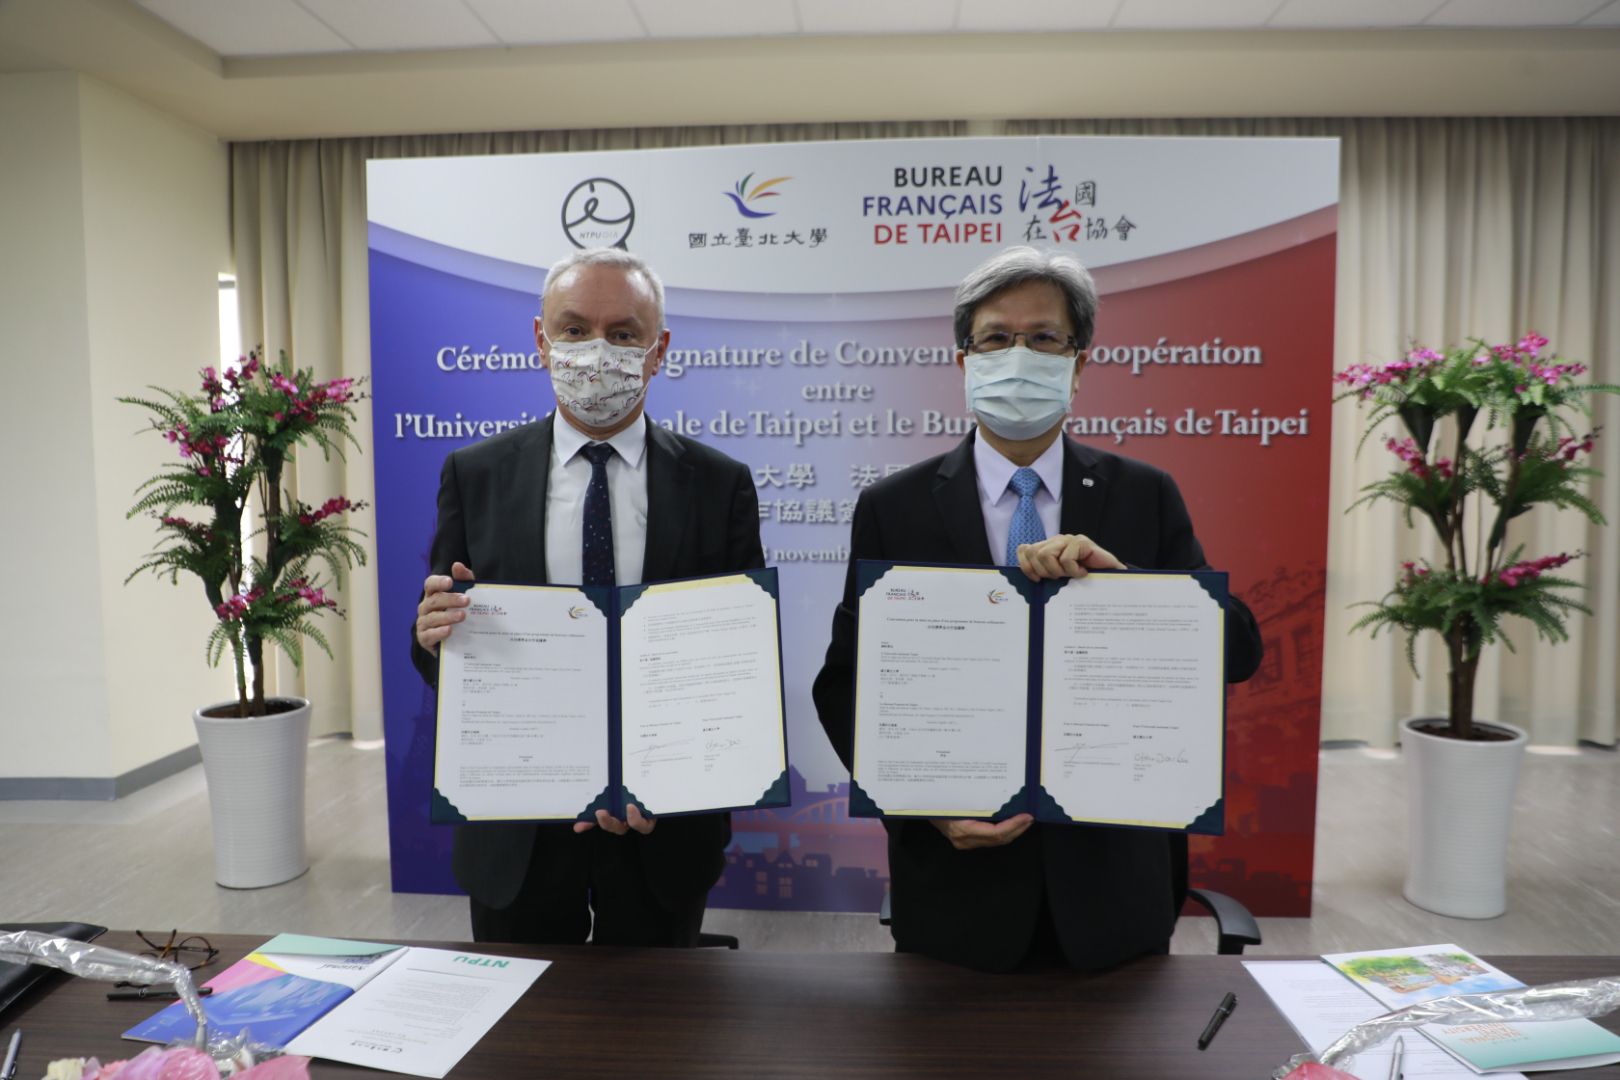 NTPU and BFT signed an MOU